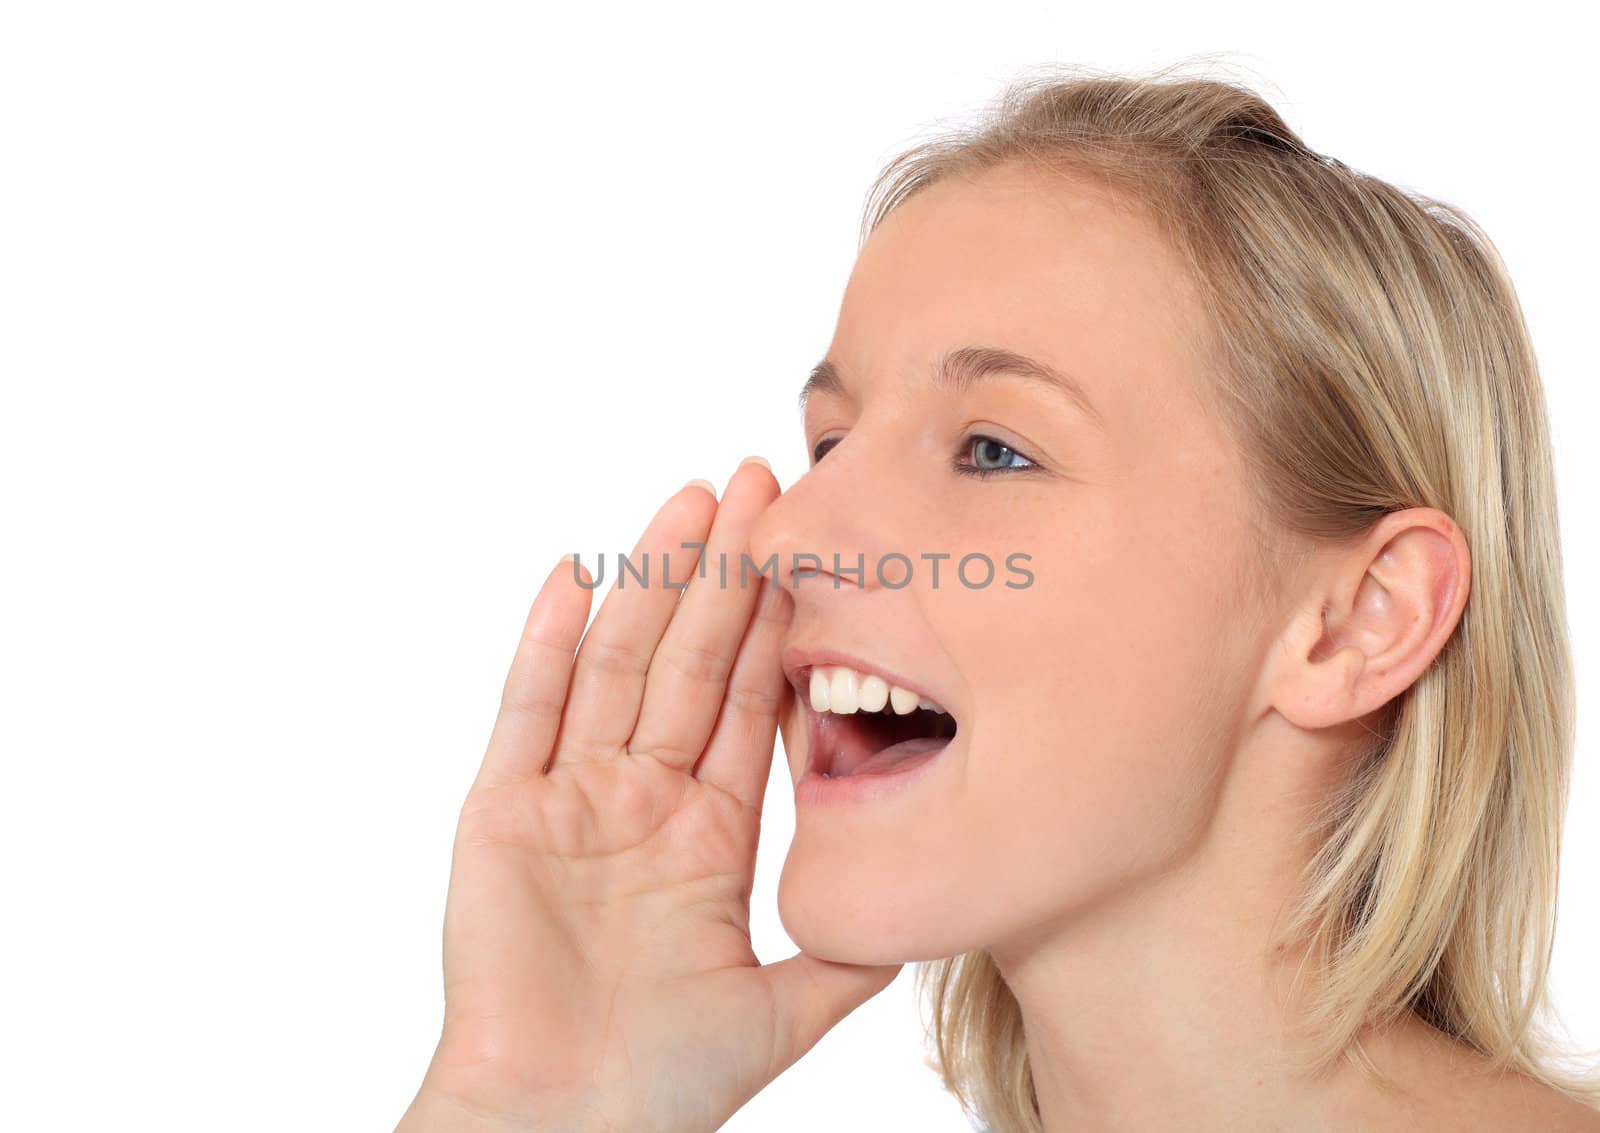 Attractive young scandinavian woman calling someone. All on white background.